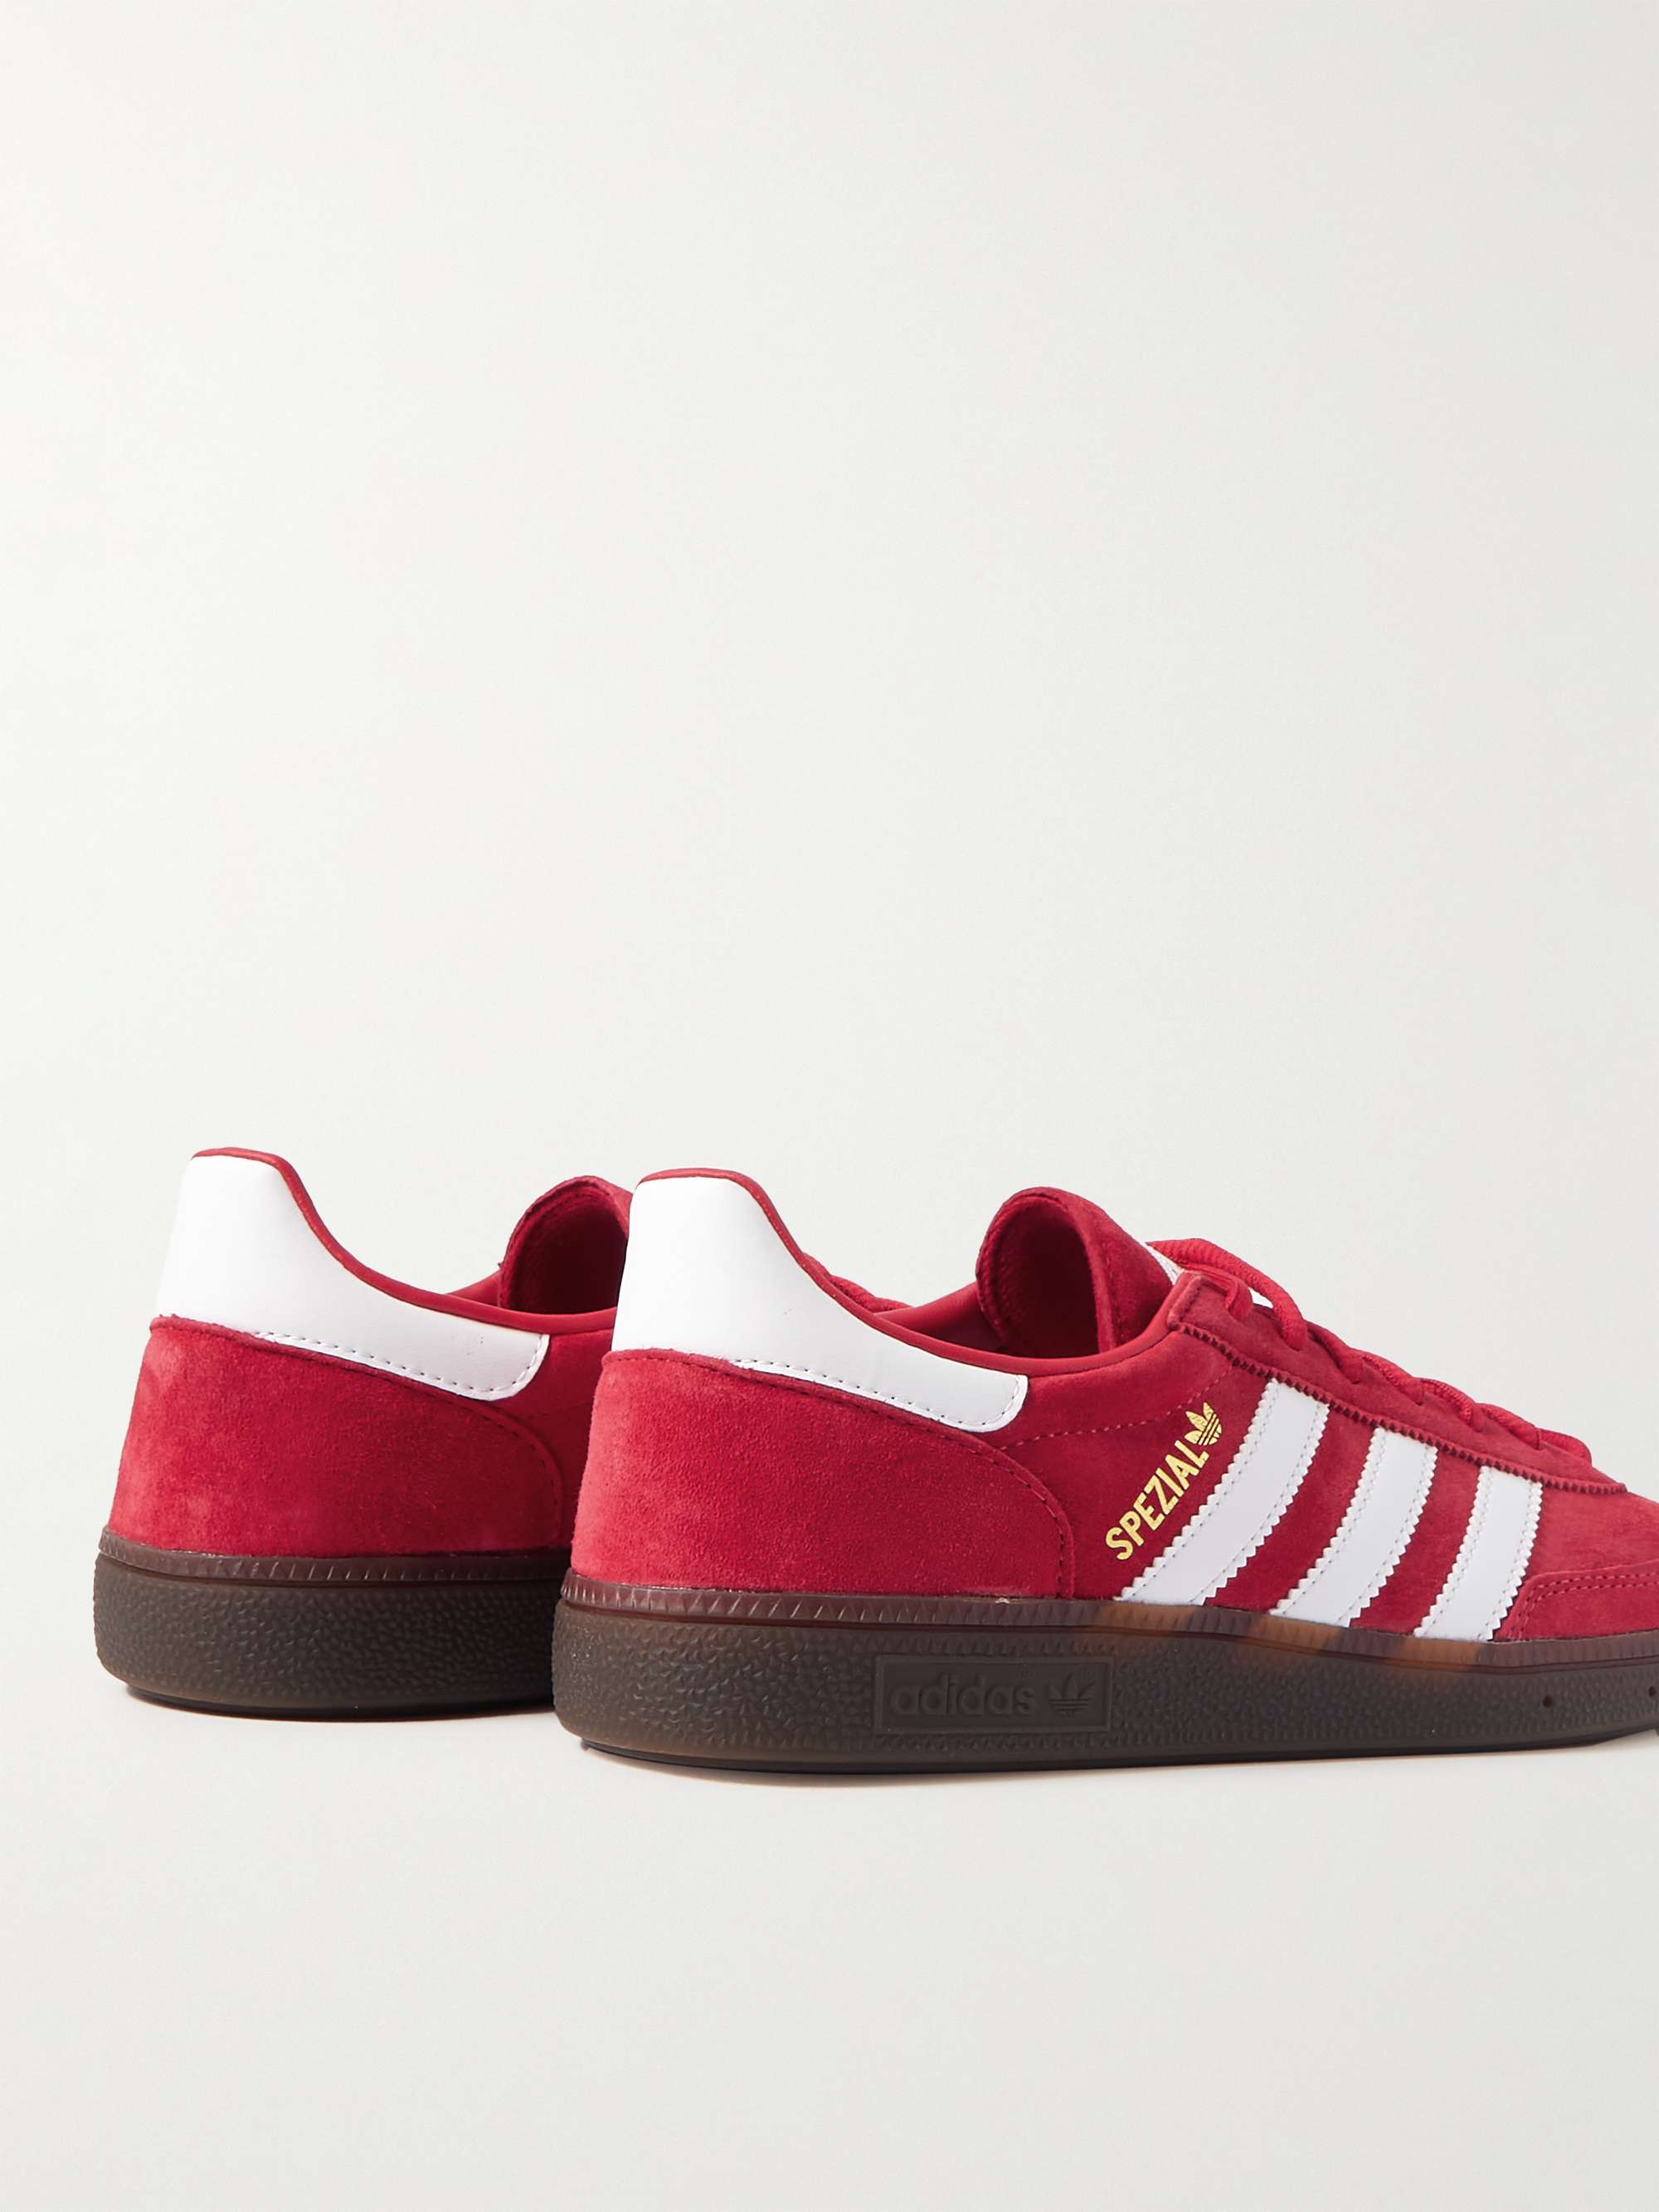 ADIDAS ORIGINALS Handball Spezial Leather-Trimmed Suede Sneakers for ...